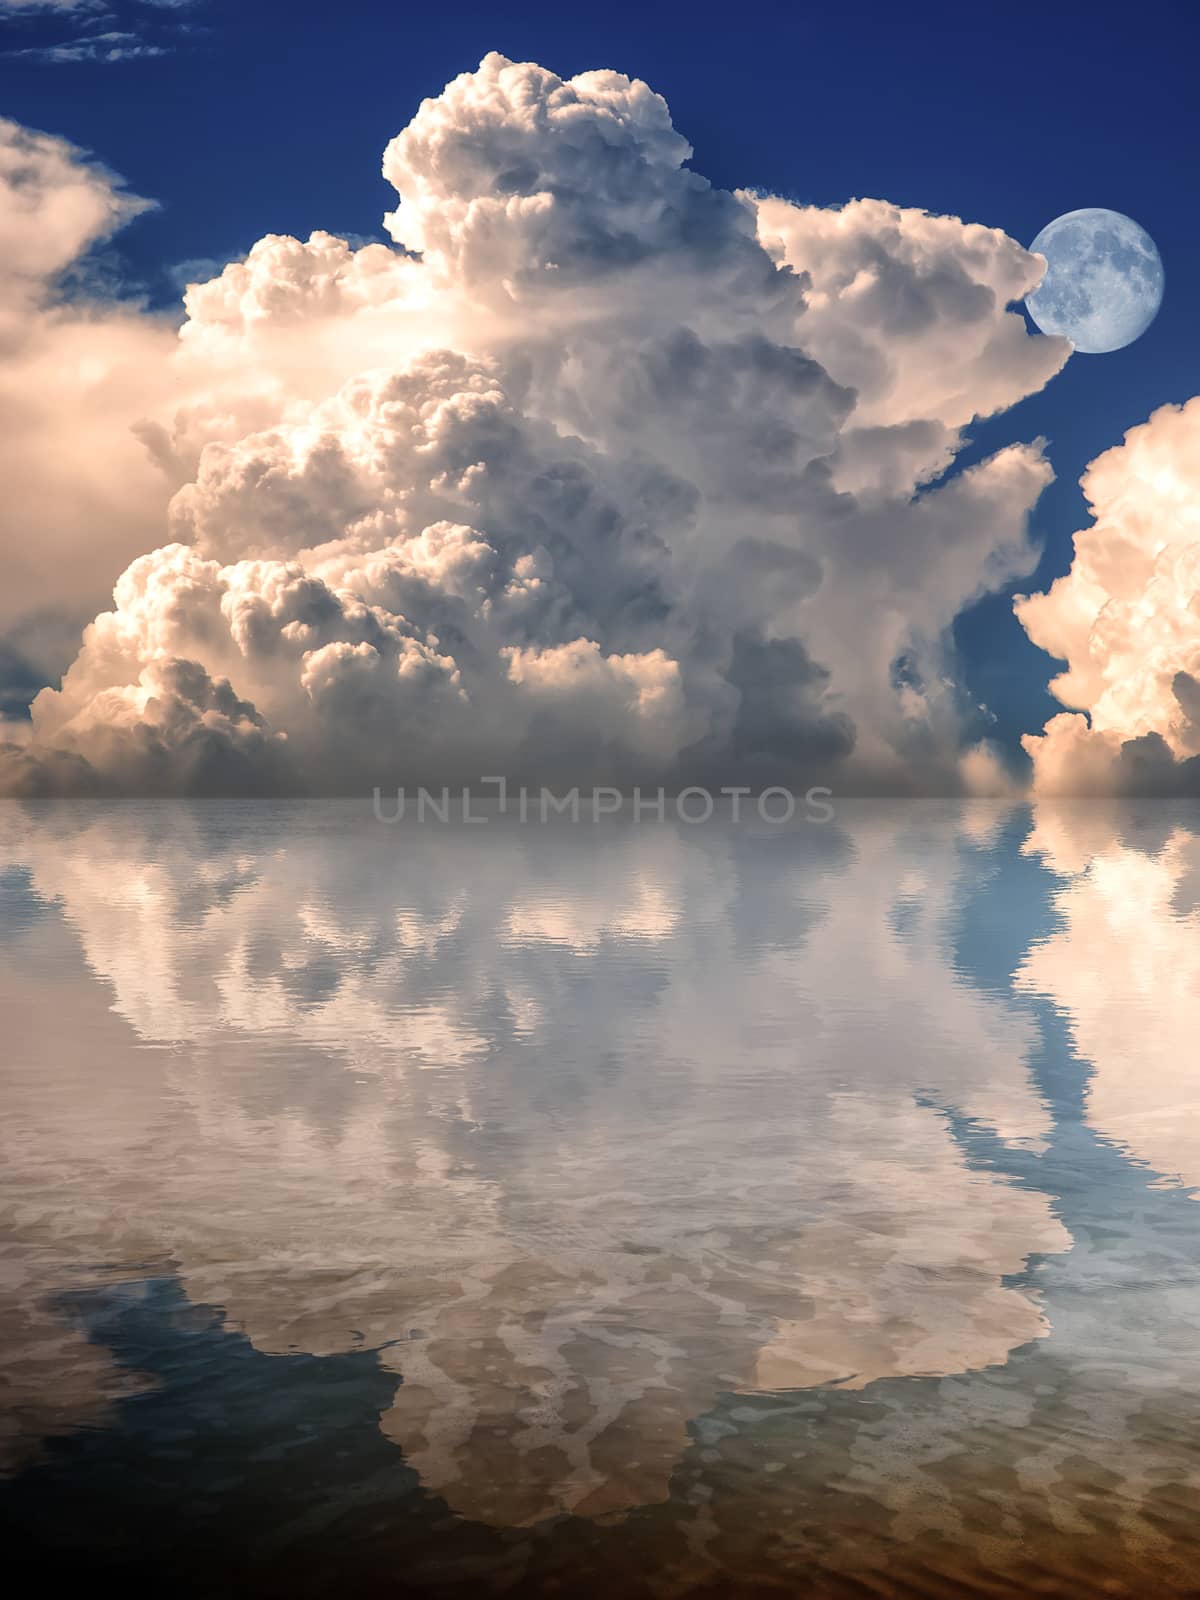 Composite Creation of Reflected Sky, Clouds and Moon by rcarner